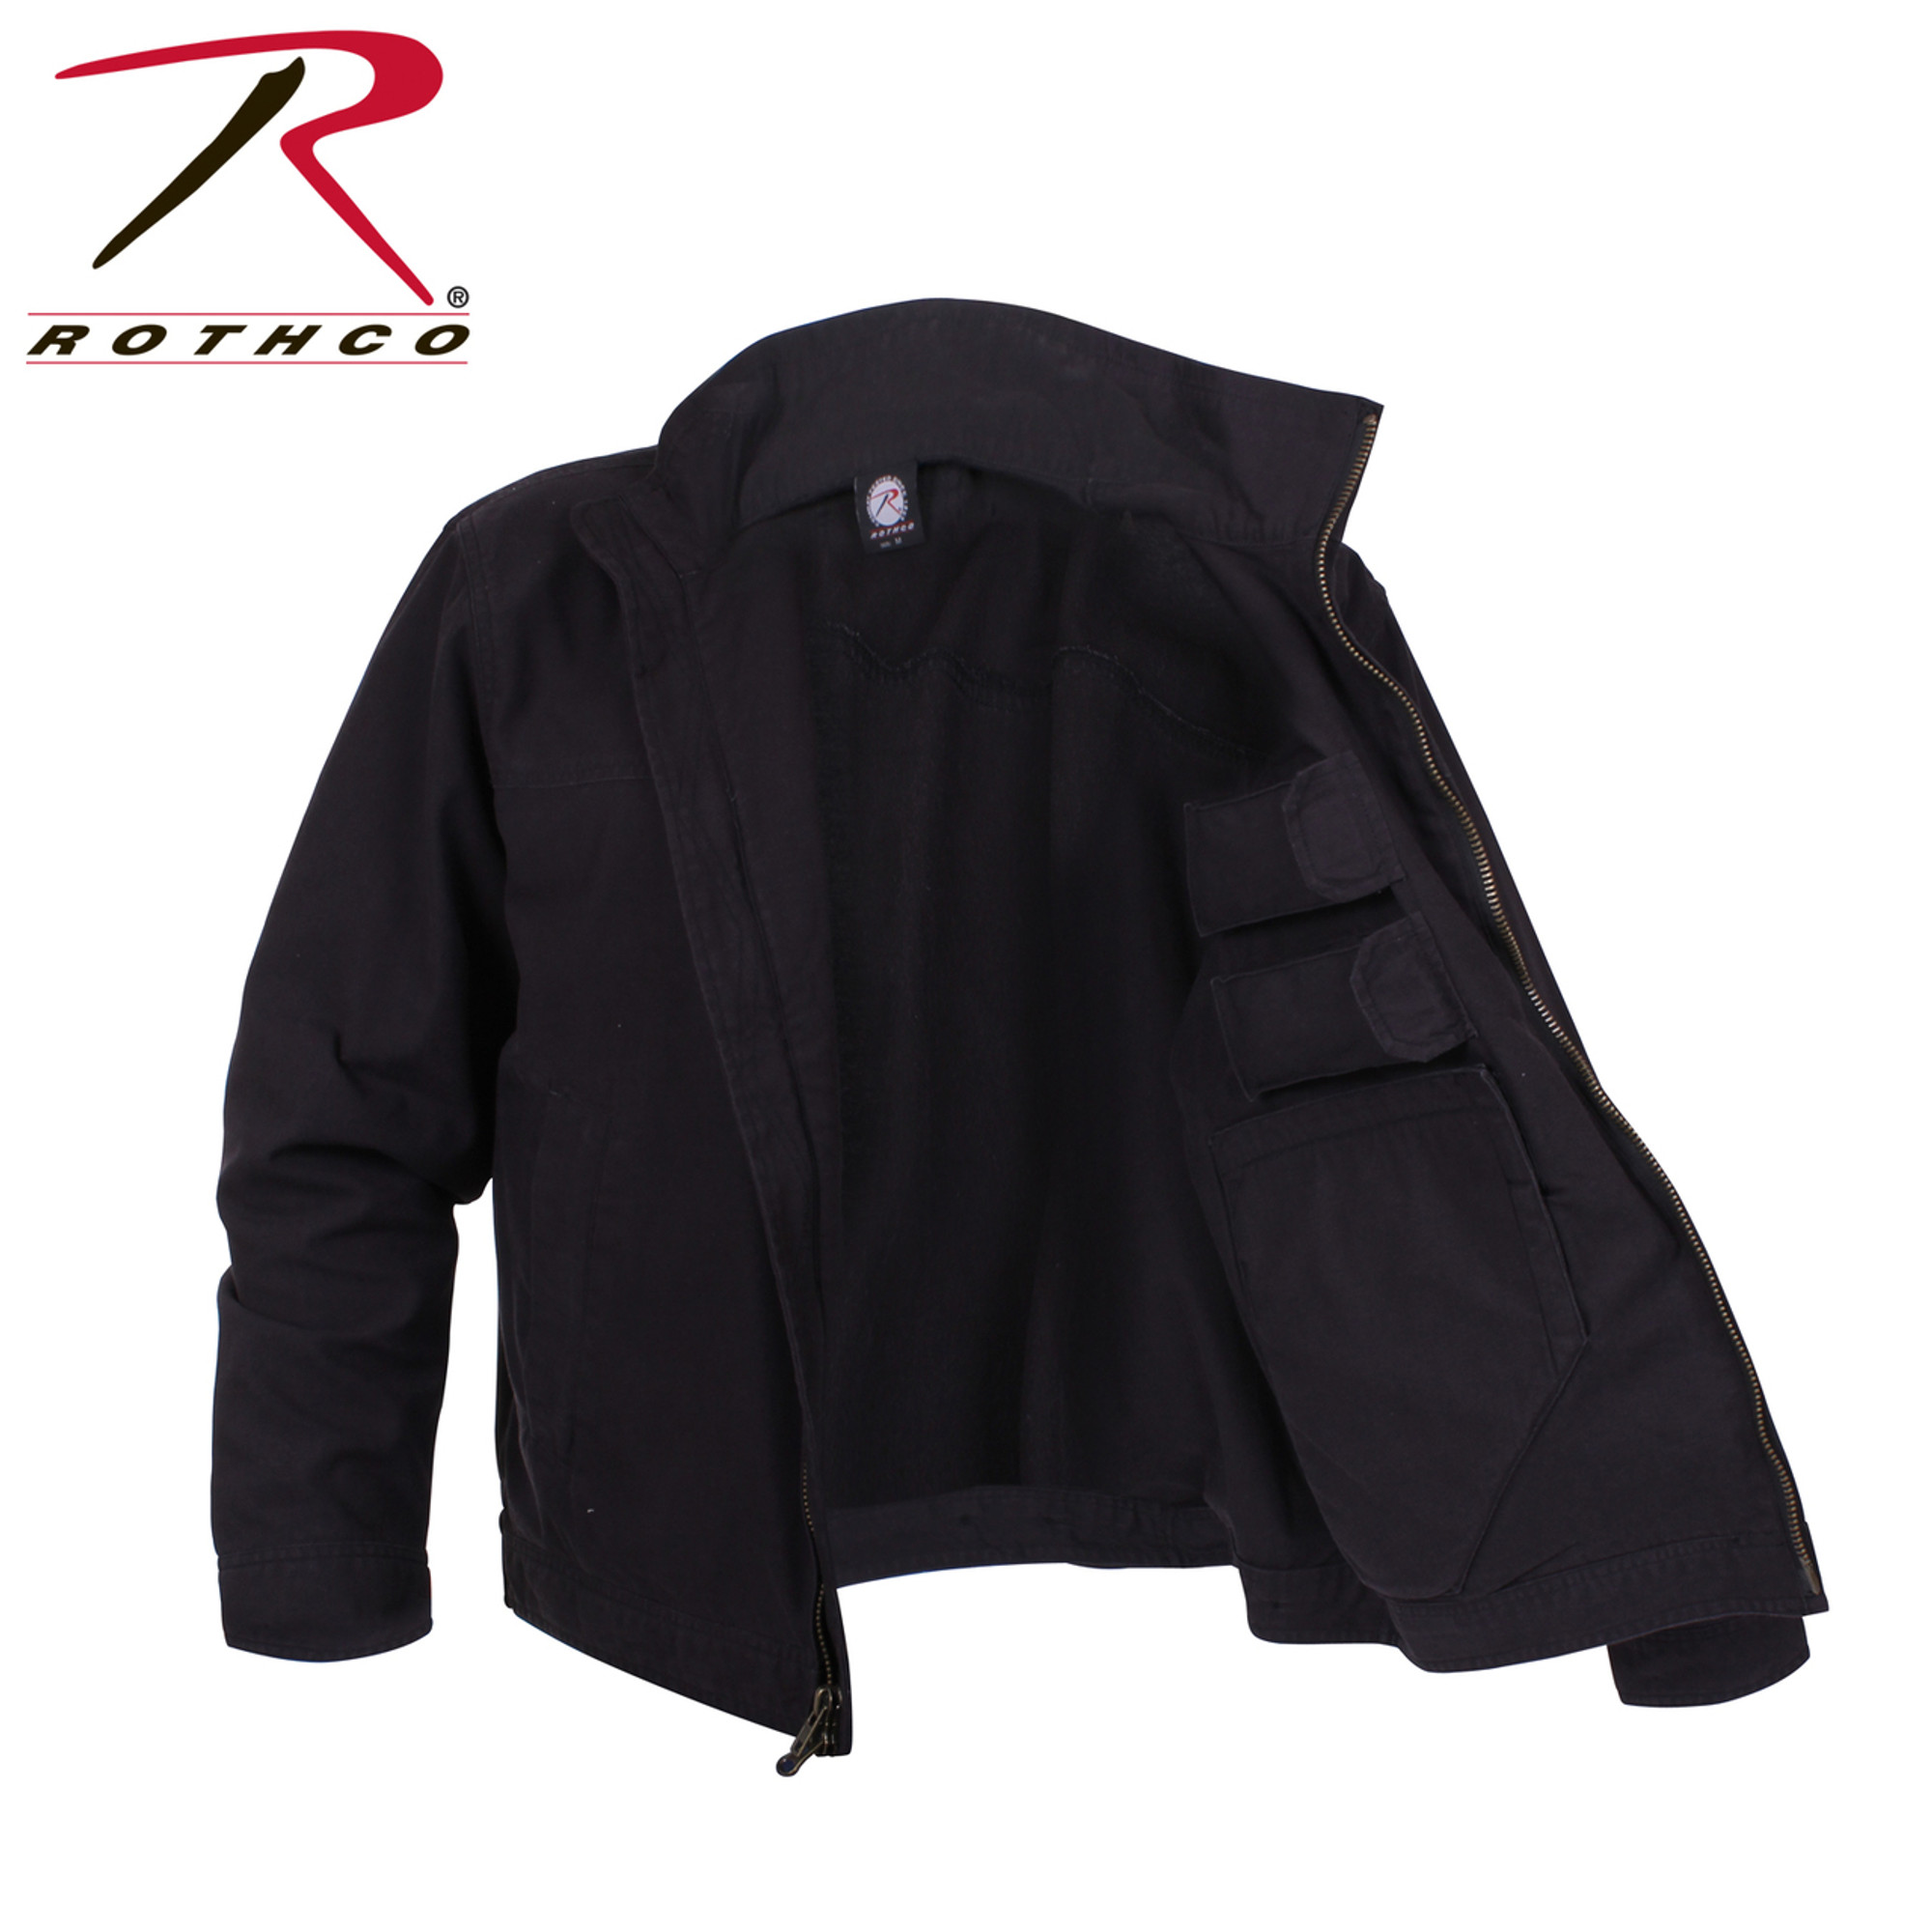 Rothco Lightweight Concealed Carry Jacket - Black